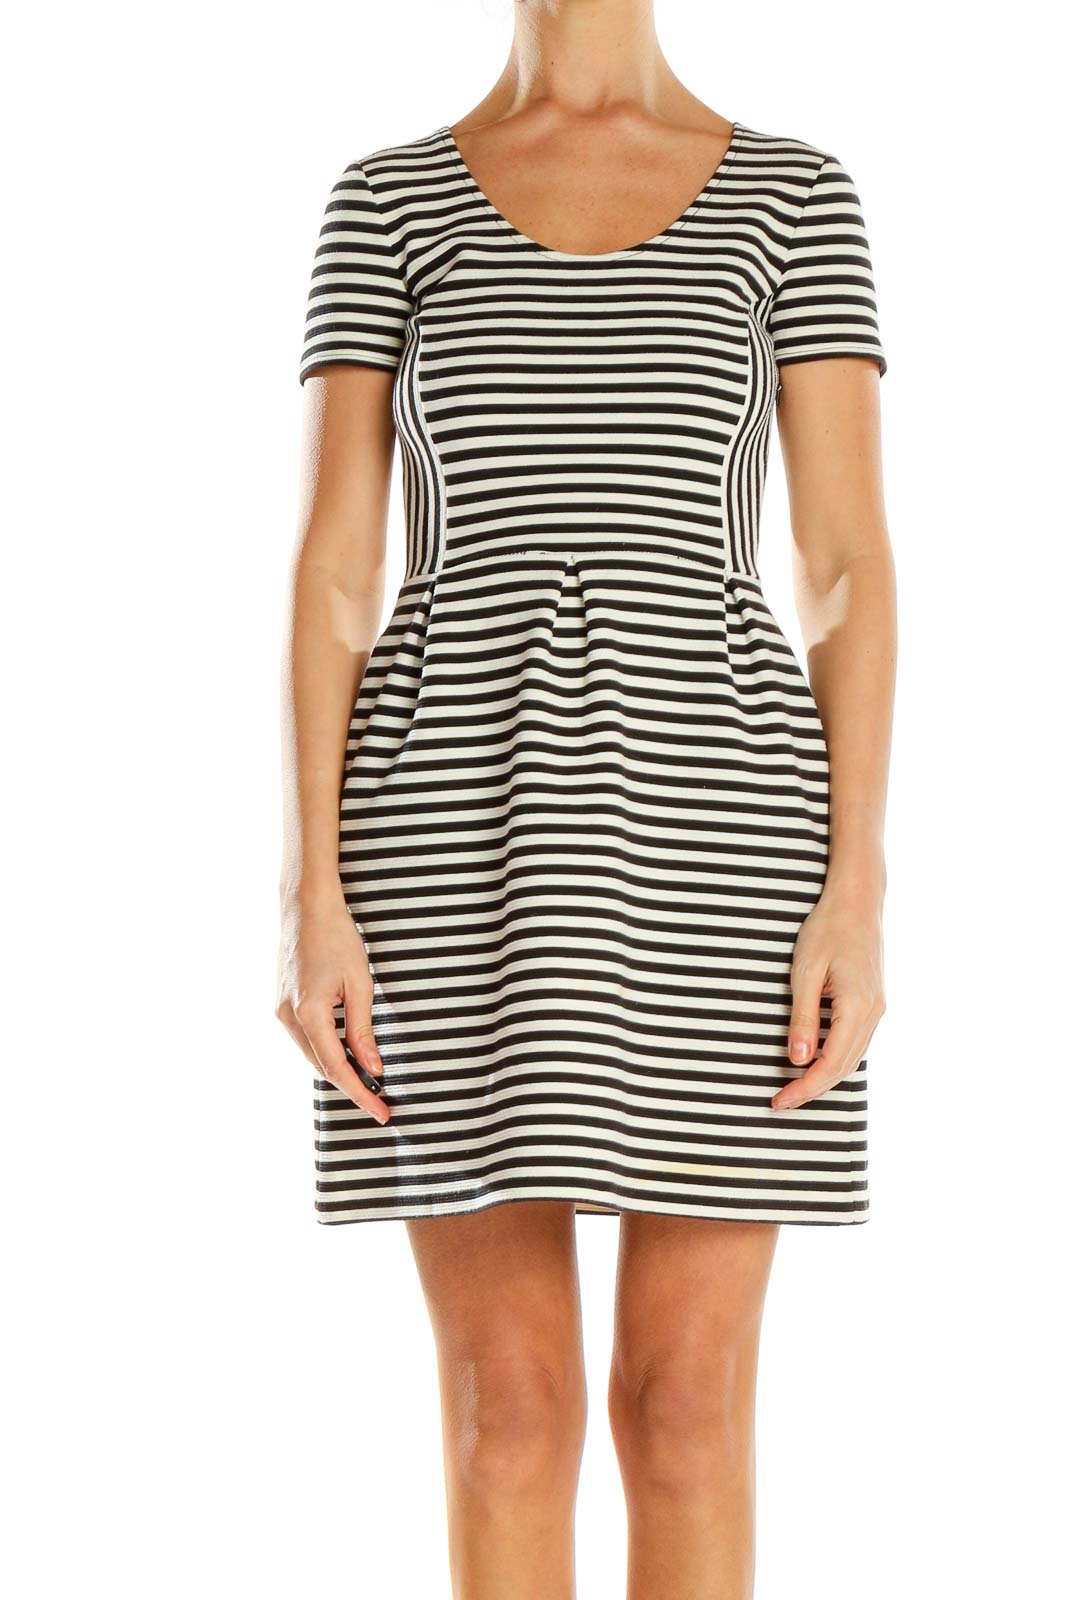 White Black Striped Fit & Flare Dress Front